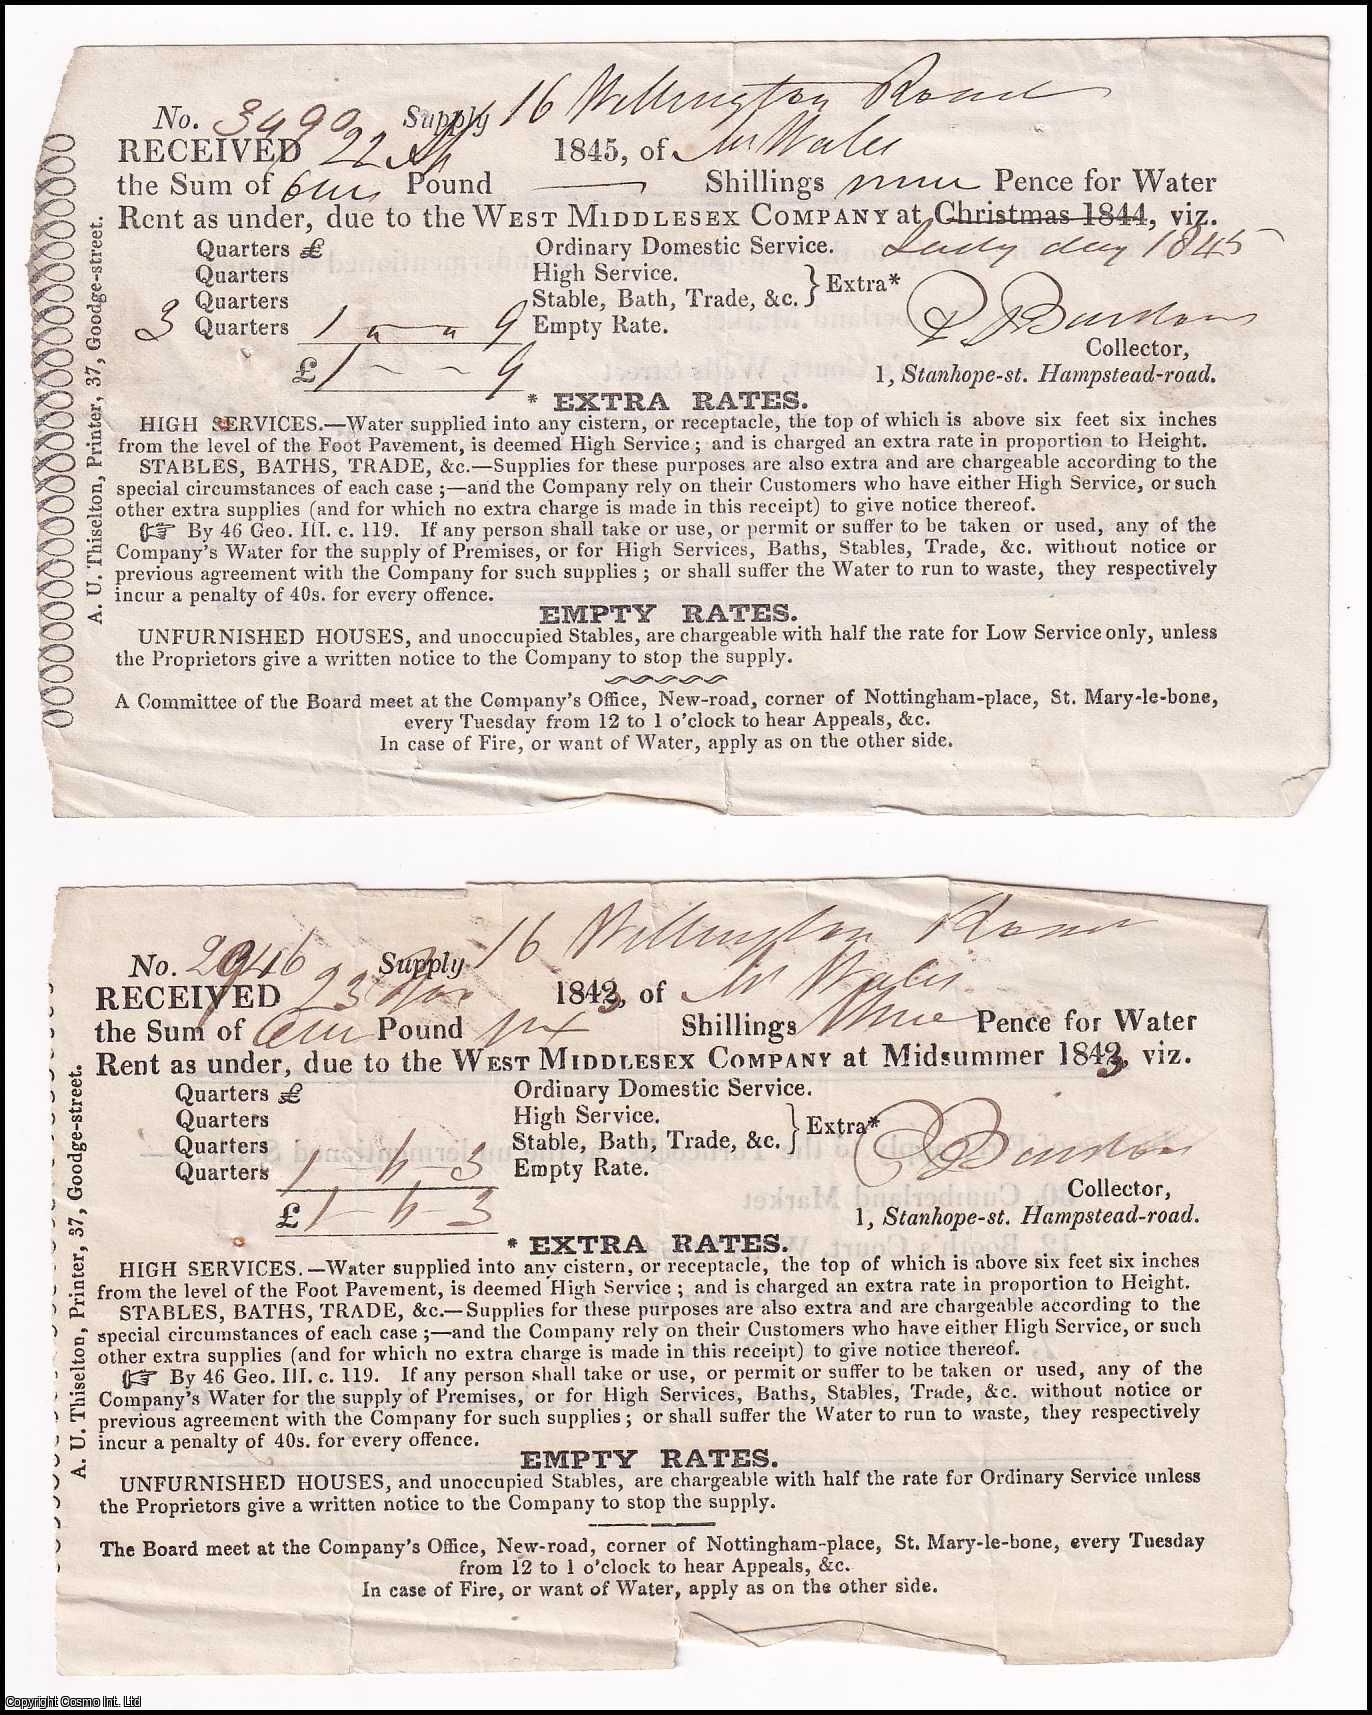 1843-45, West Middlesex Company - Water Rent Receipts, dated 1843 & 1845, paid to the West Middlesex Company. Two printed receipts, each about 4 x 6.5 inches, completed in ink.